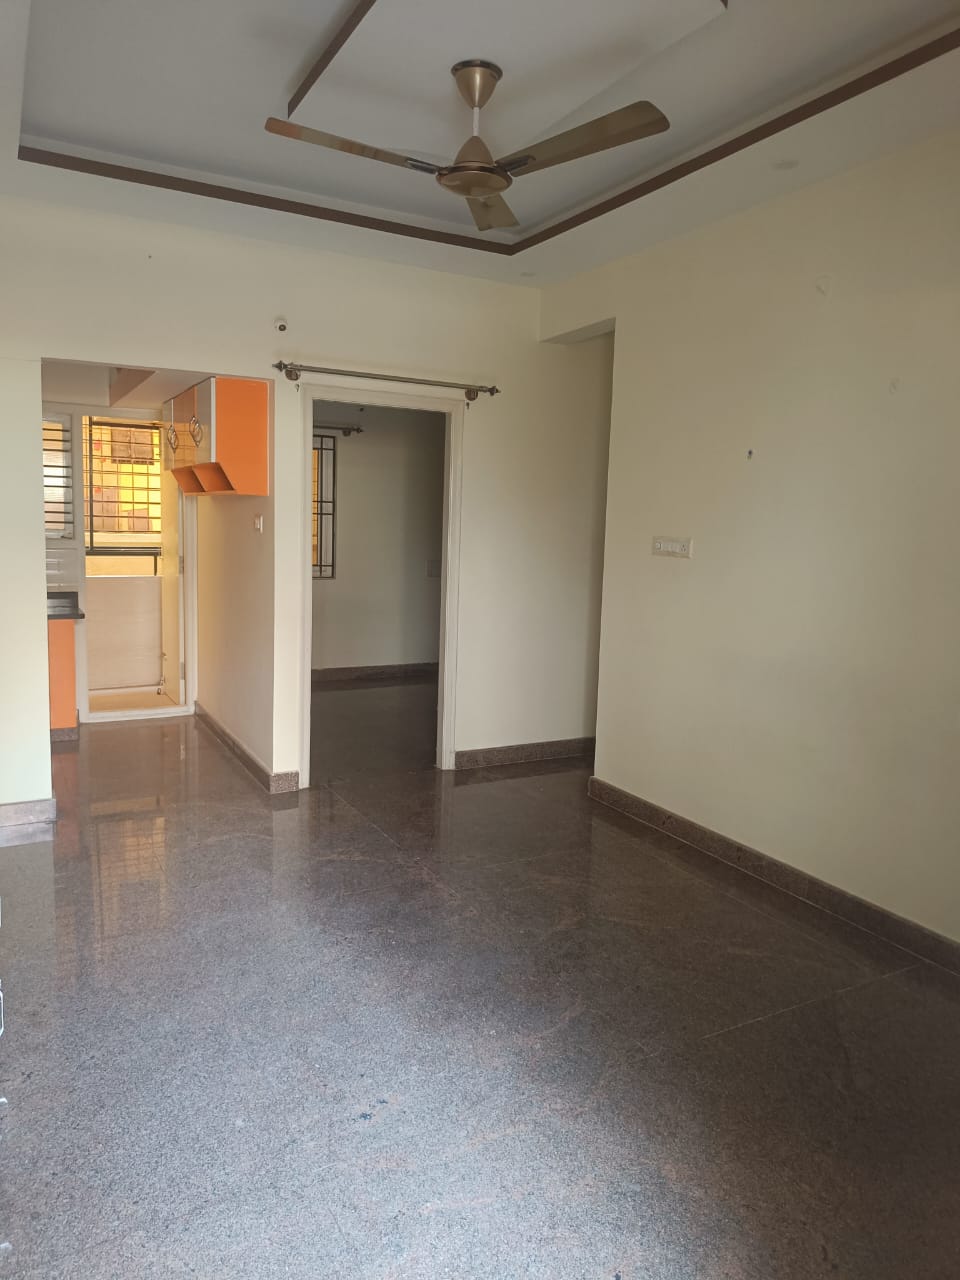 1 BHK Independent House for Lease Only at JAML2 - 3322 in BEML Layout